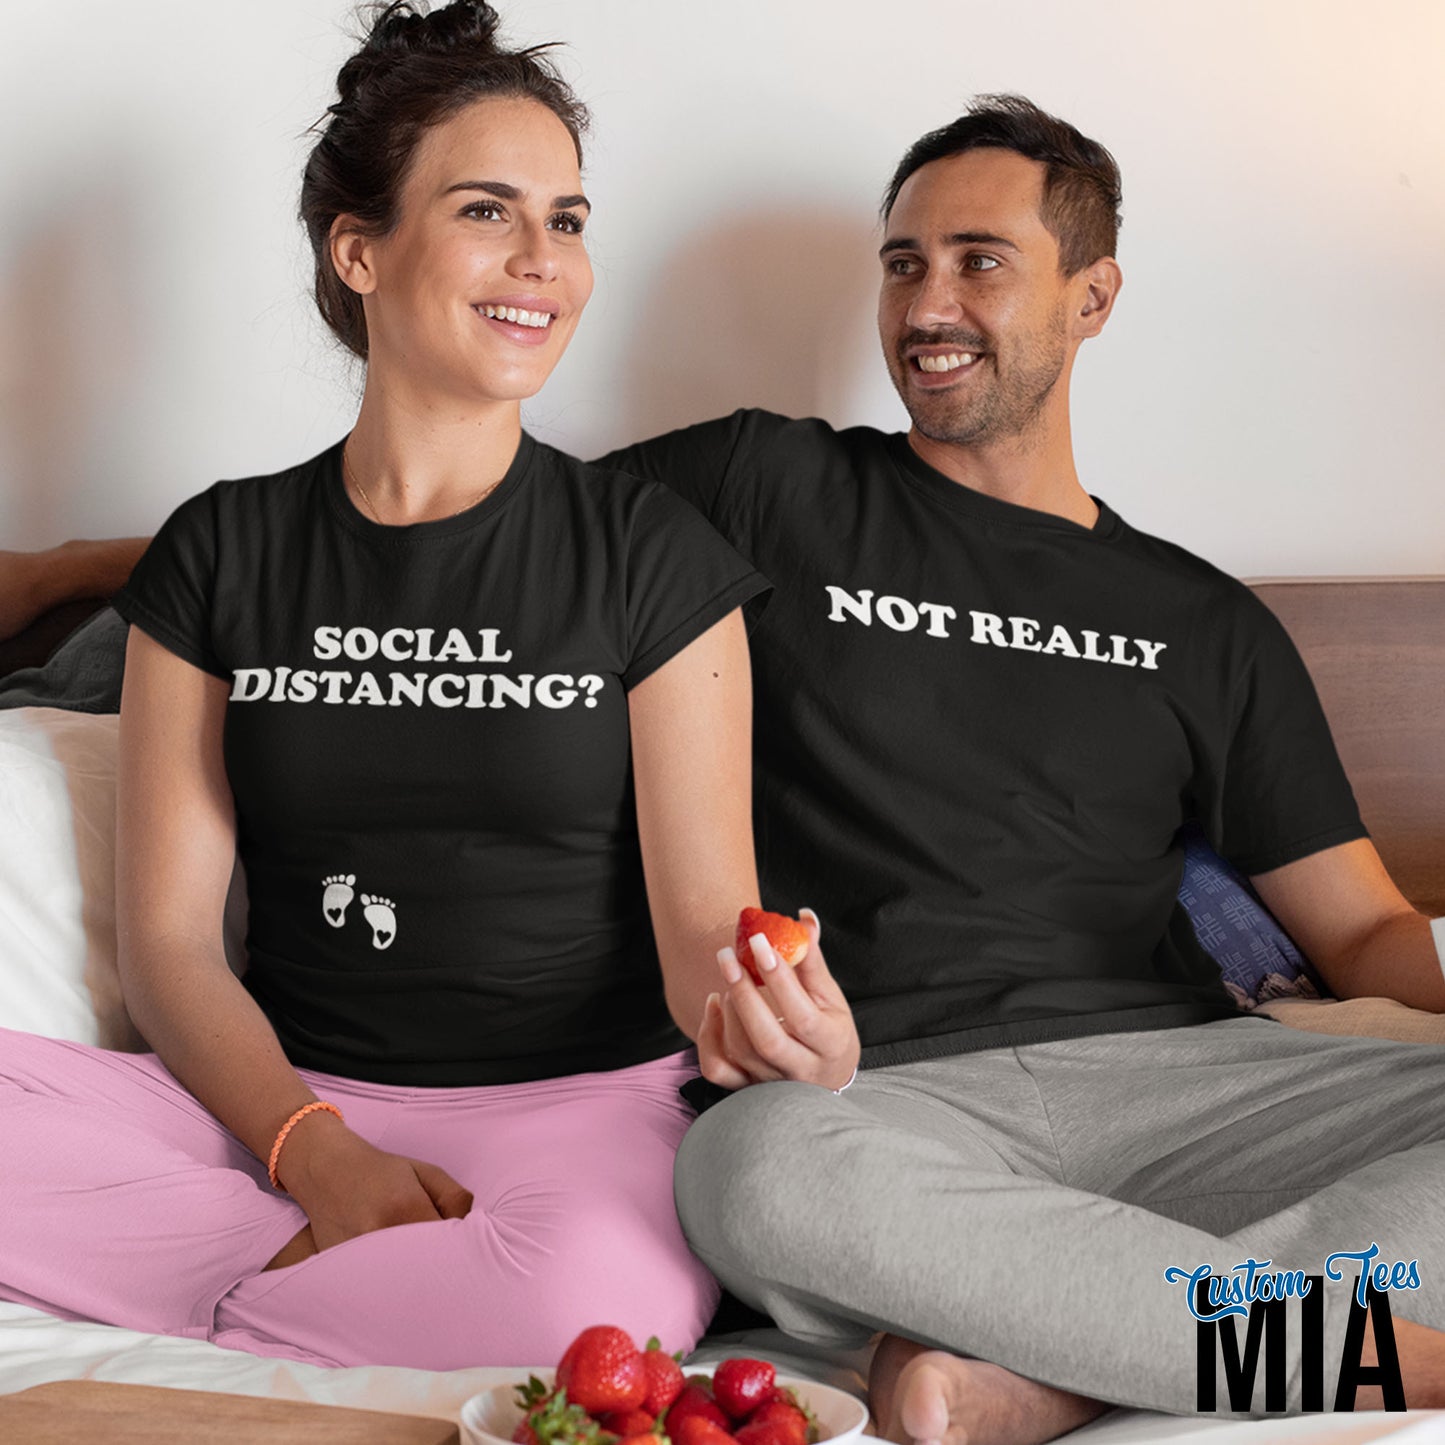 Social Distancing Funny Pregnancy Announcement Shirts